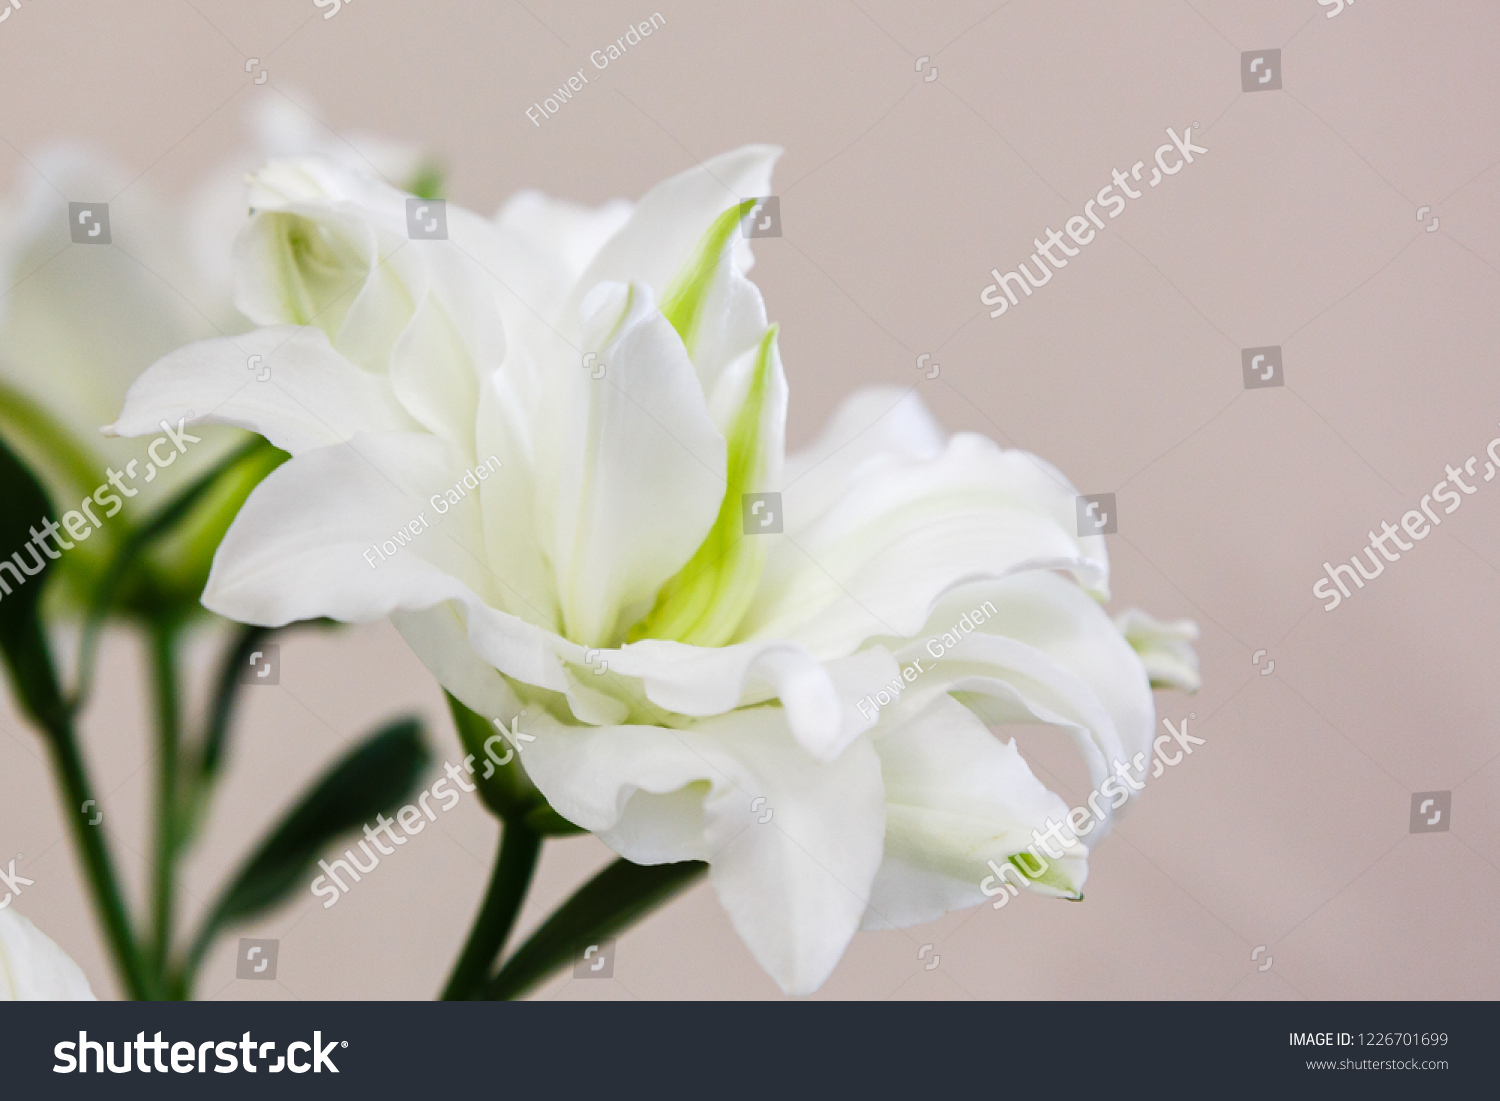 lily flowers lily lat genus plants stock photo (edit now) 1226701699